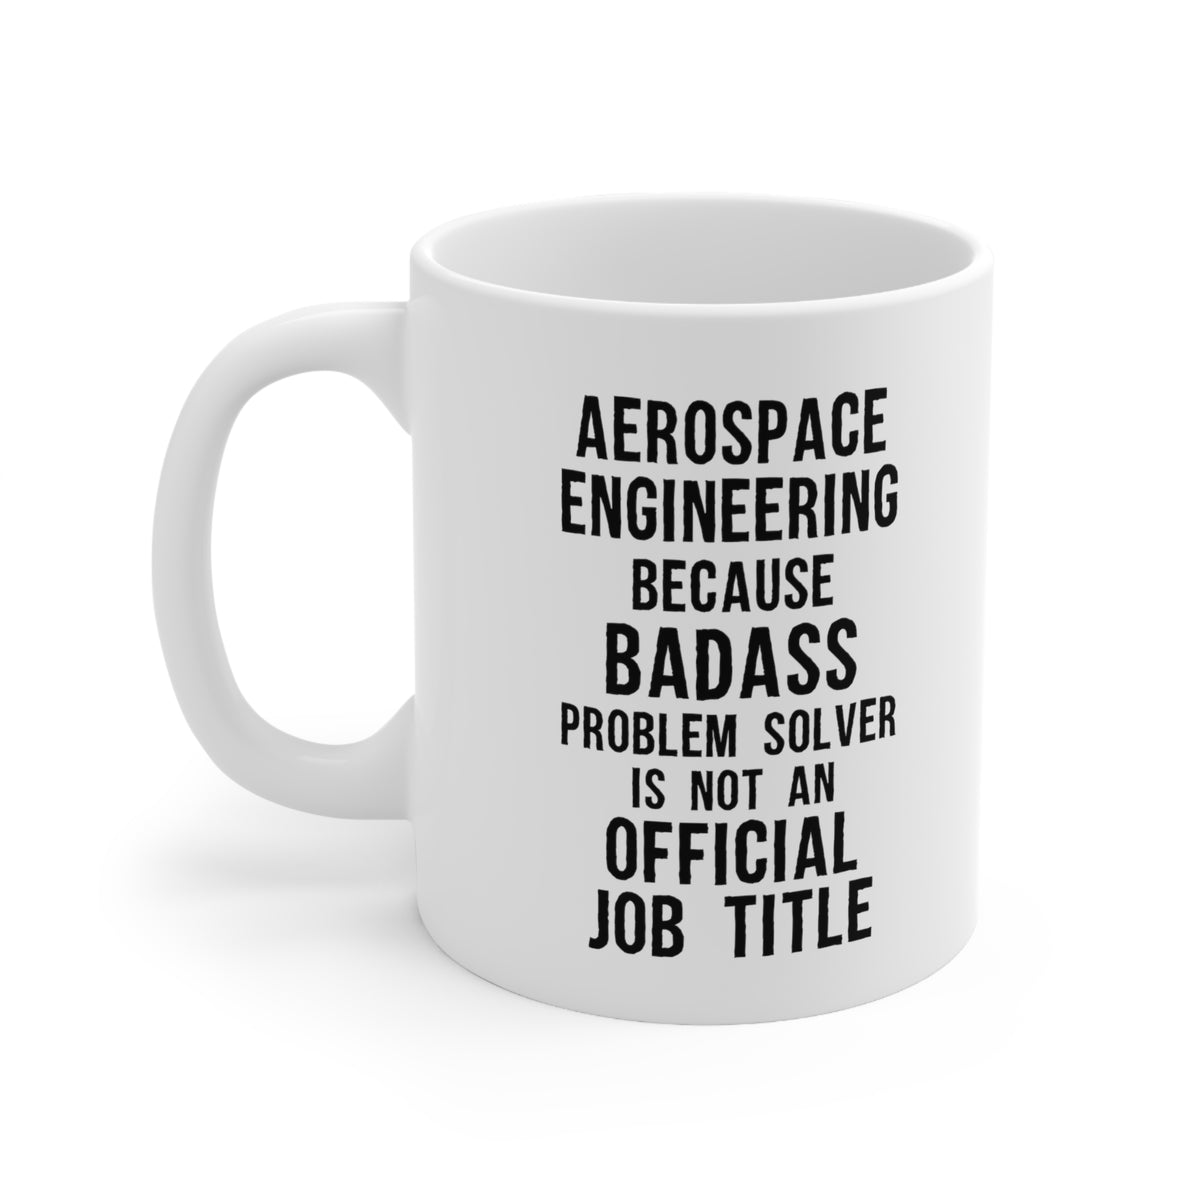 Aerospace Engineer - Aerospace Engineering Because Badass Problem Solver Is Not An Official Job Title - Christmas Birthday White Coffee Mug For Men Women Coworker